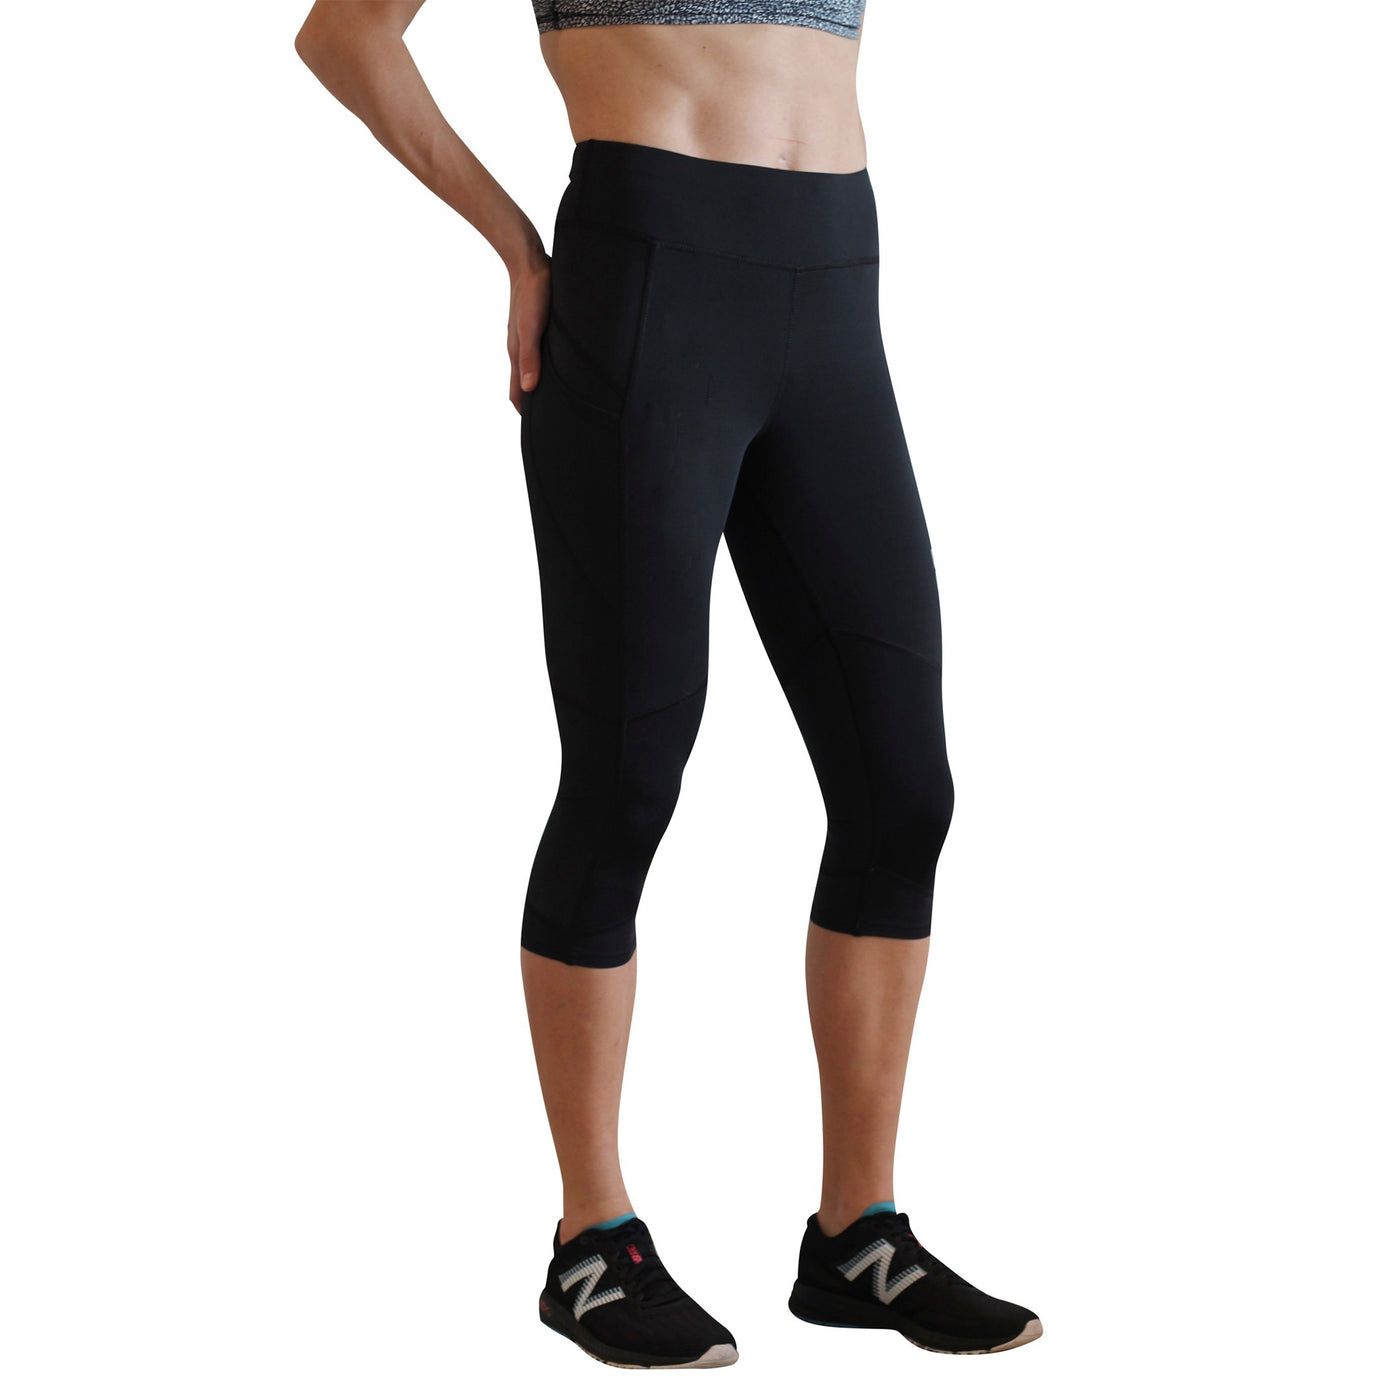 Patagonia Womens Centered Tights Sale  Patagonia womens, Pants for women,  Tights